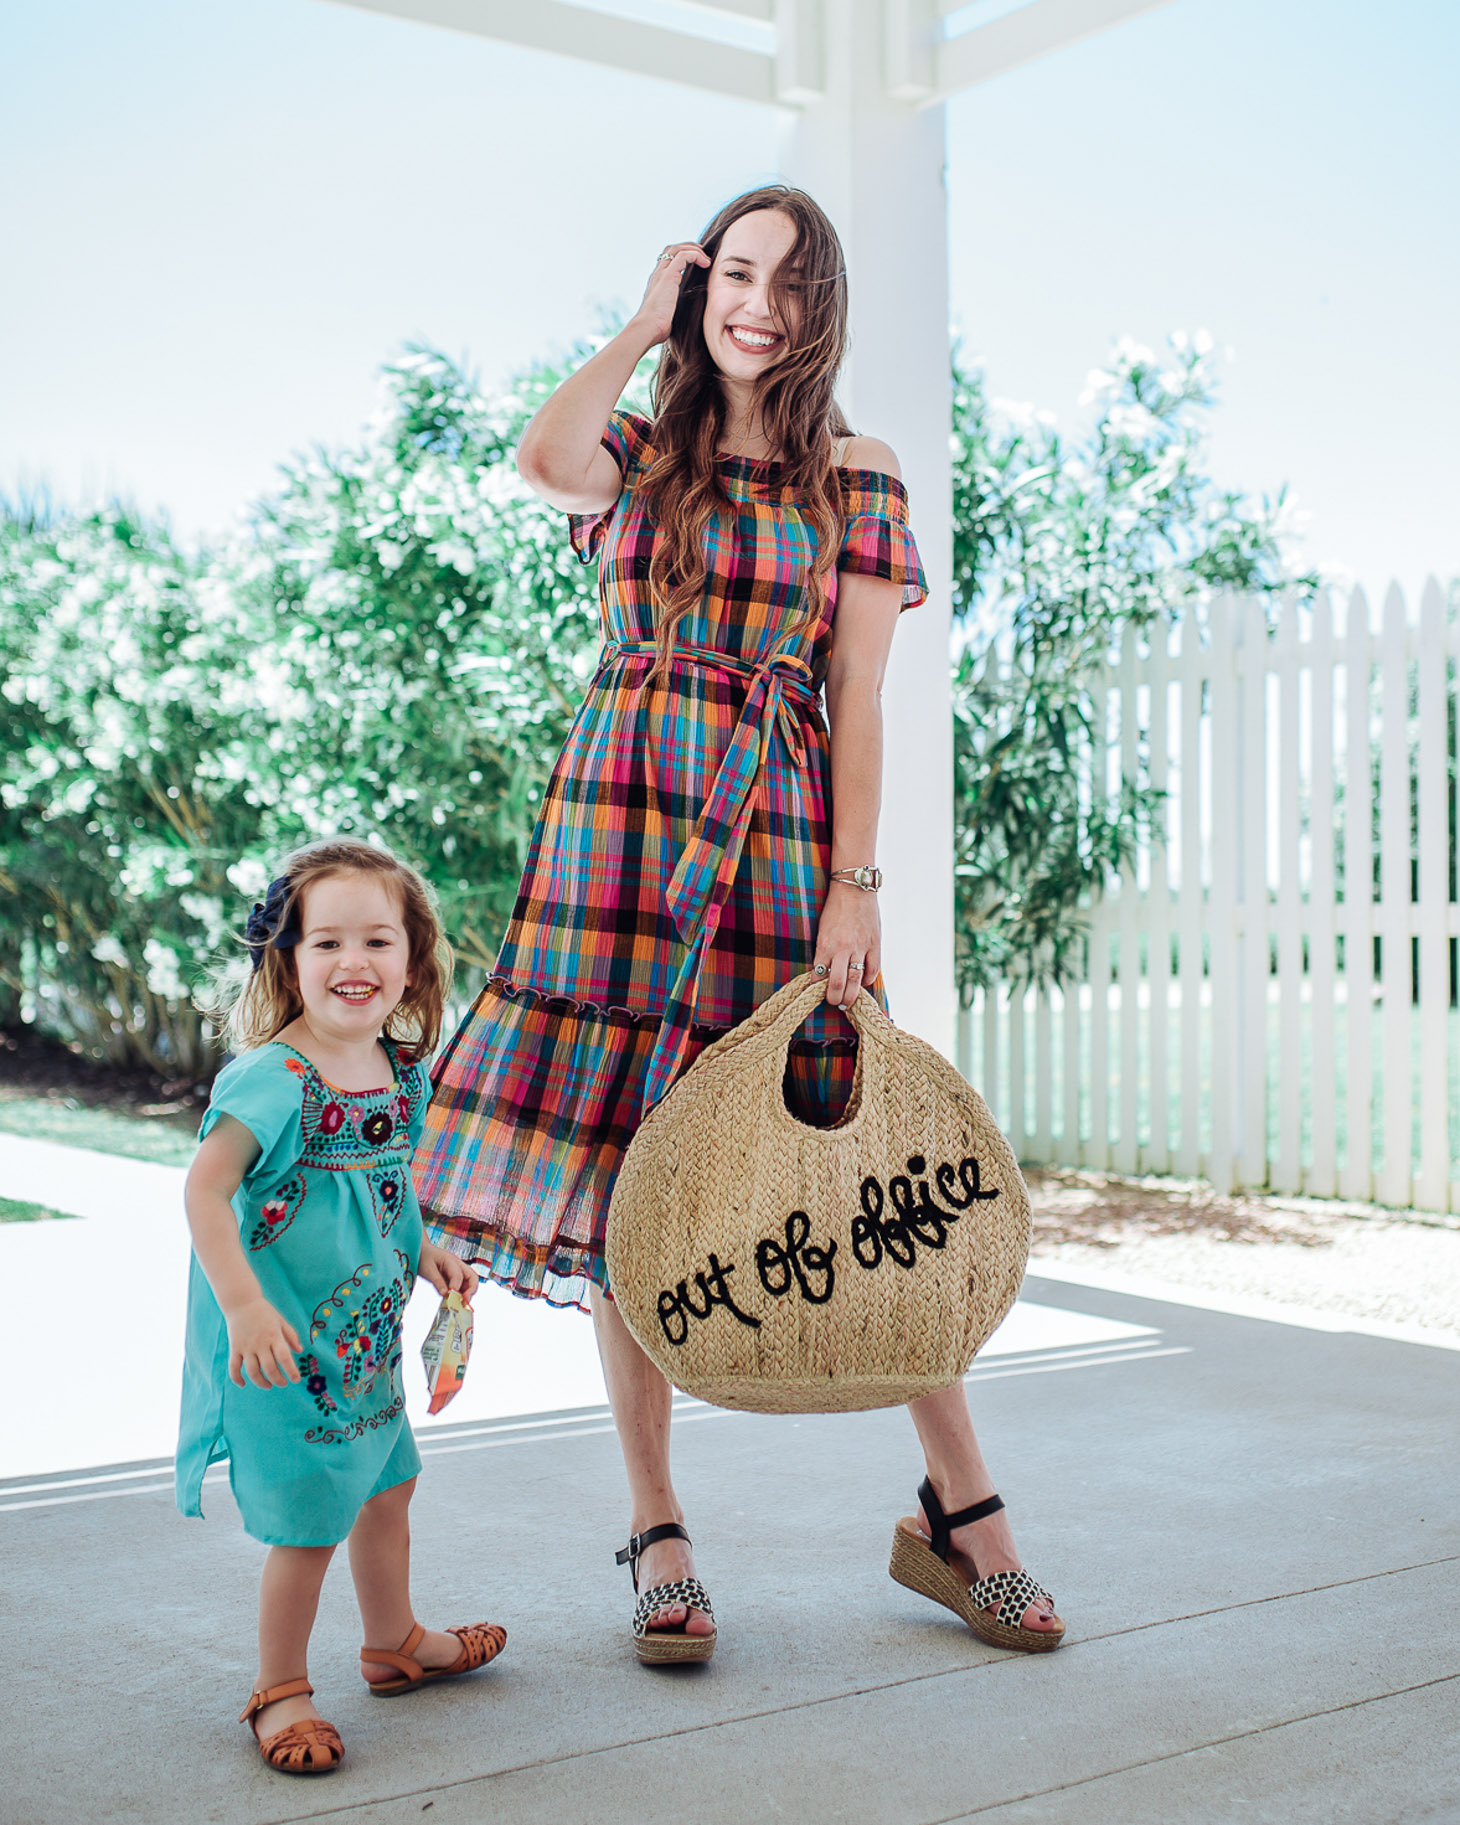 Francesca’s Sundress Outfits to wear for Mothers Day, featured by top US fashion blog, Lone Star Looking Glass: image of a woman wearing a Francesca’s plaid over the shoulder dress, wedge heels and a shopper jute tote